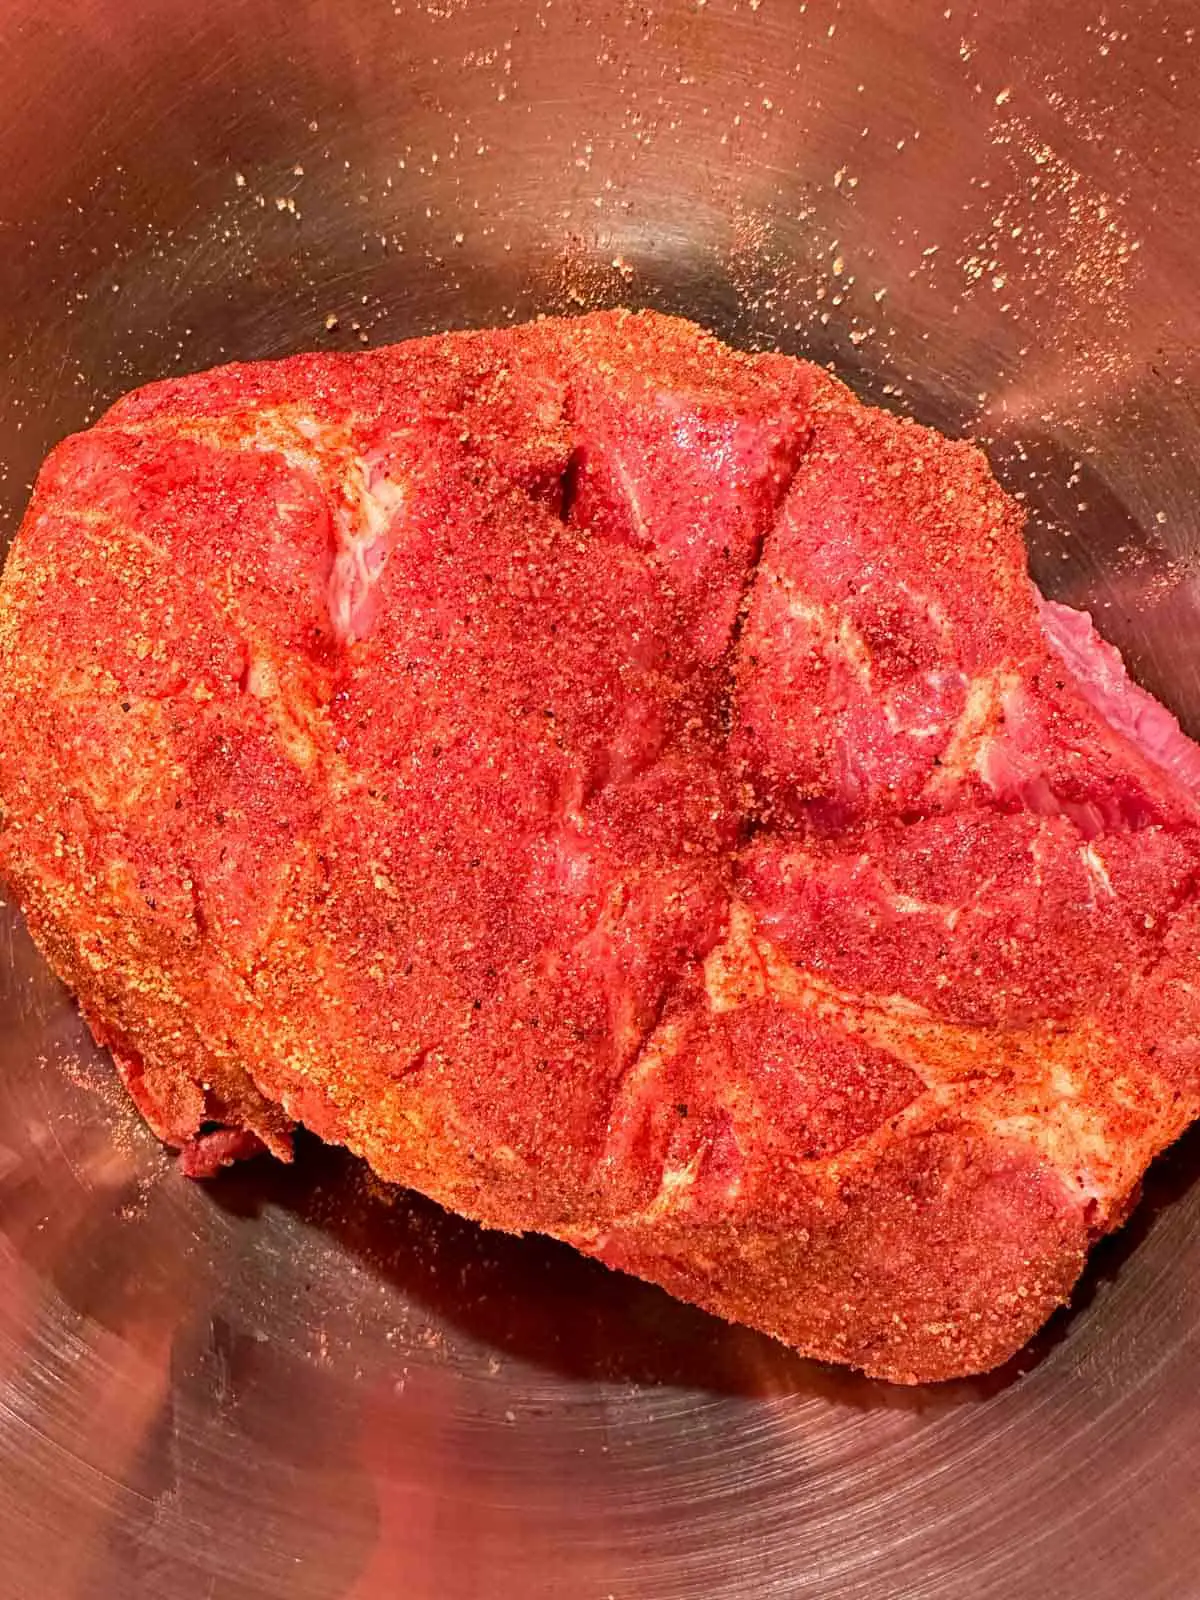 Pork butt seasoned with a dry rub in a metal bowl.